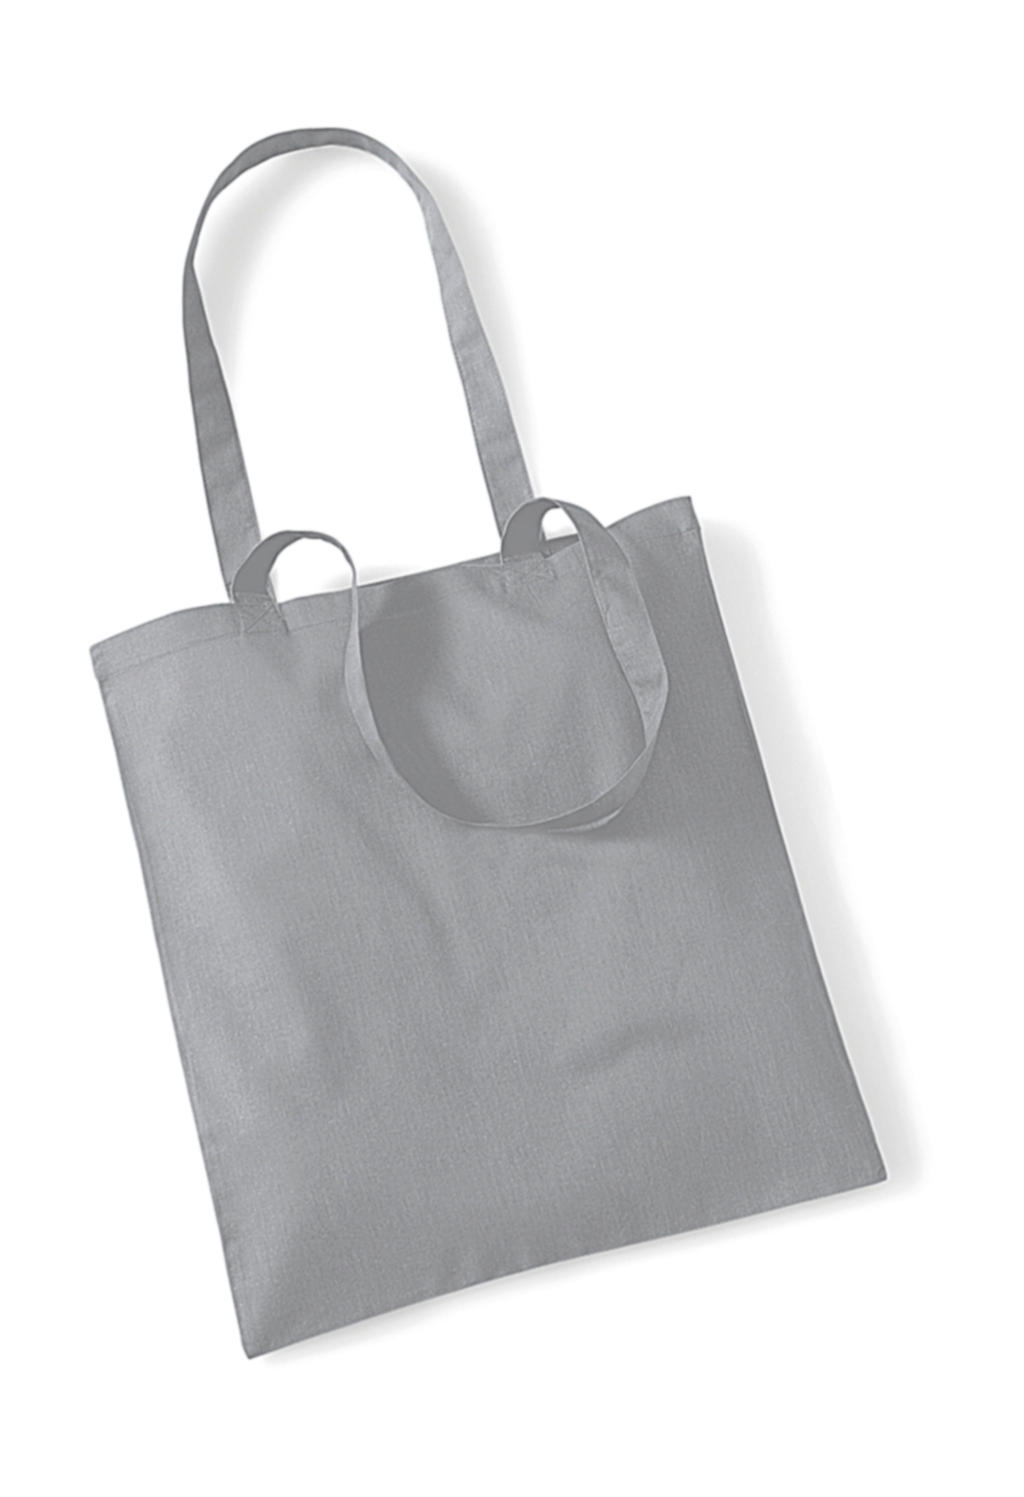  Bag for Life - Long Handles in Farbe Pure Grey